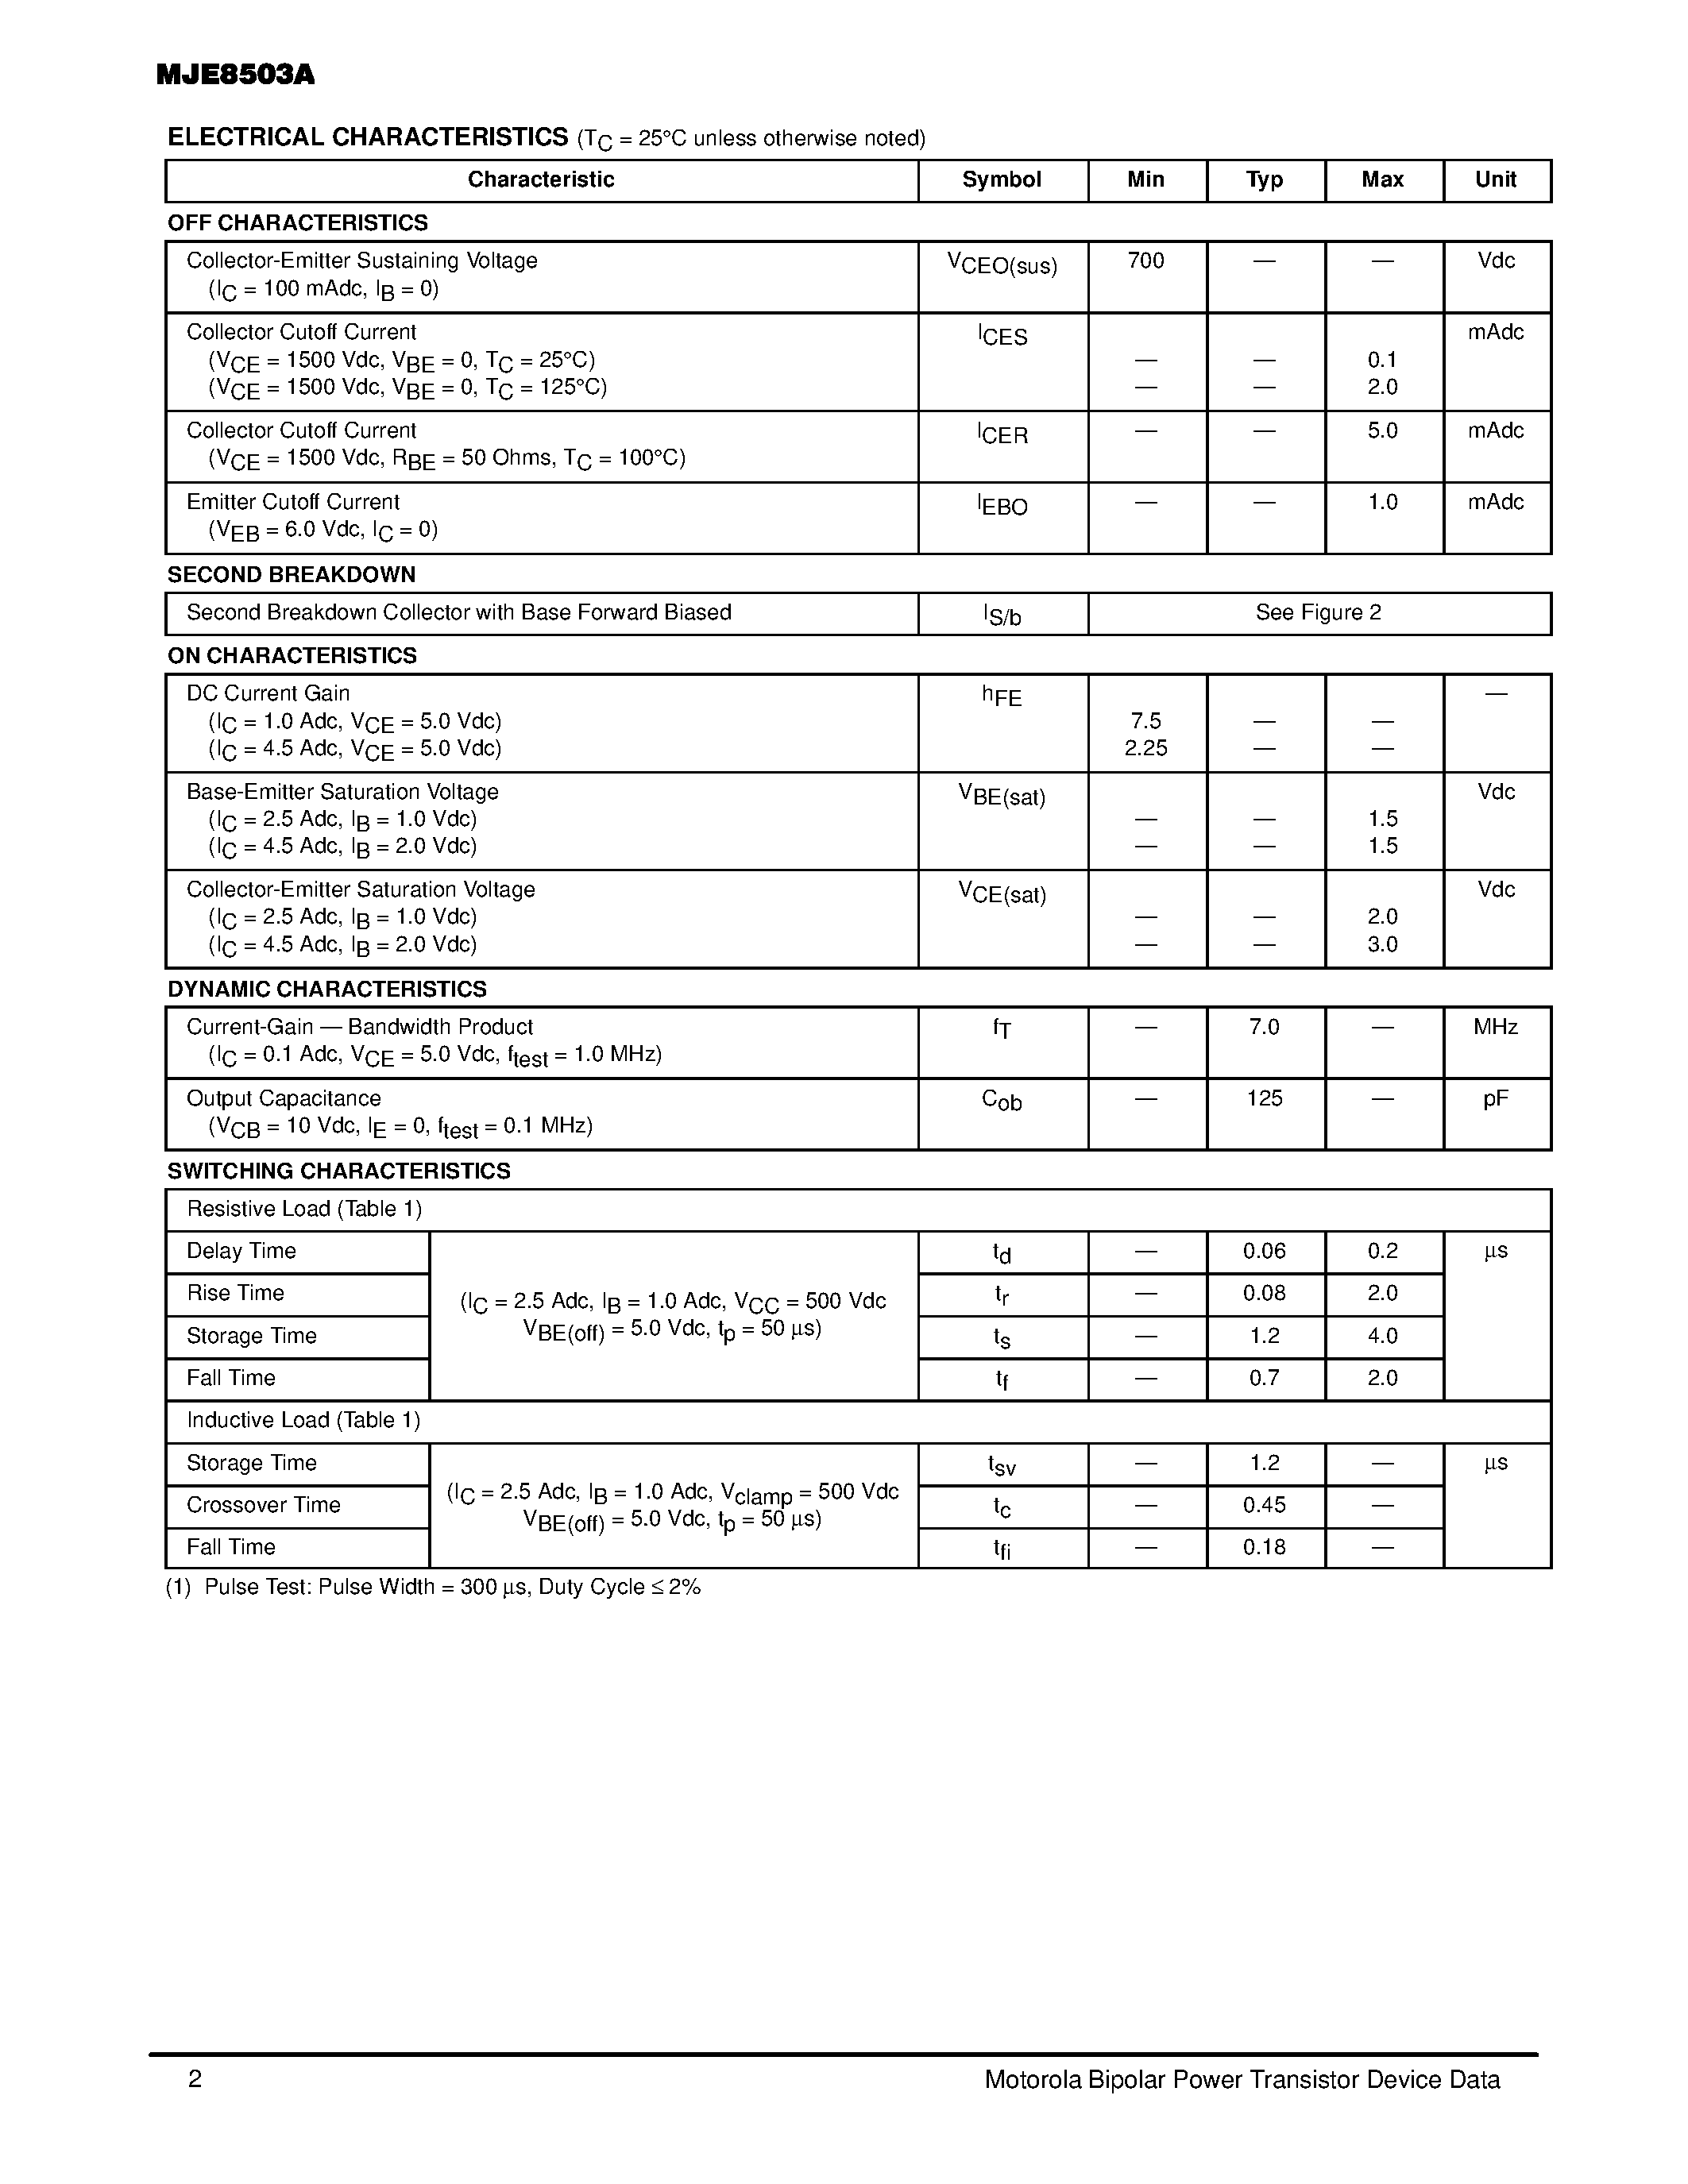 Datasheet MJE8503A - POWER TRANSISTORS 5.0 AMPERES 1500 VOLTS - BVCES 80 WATTS page 2